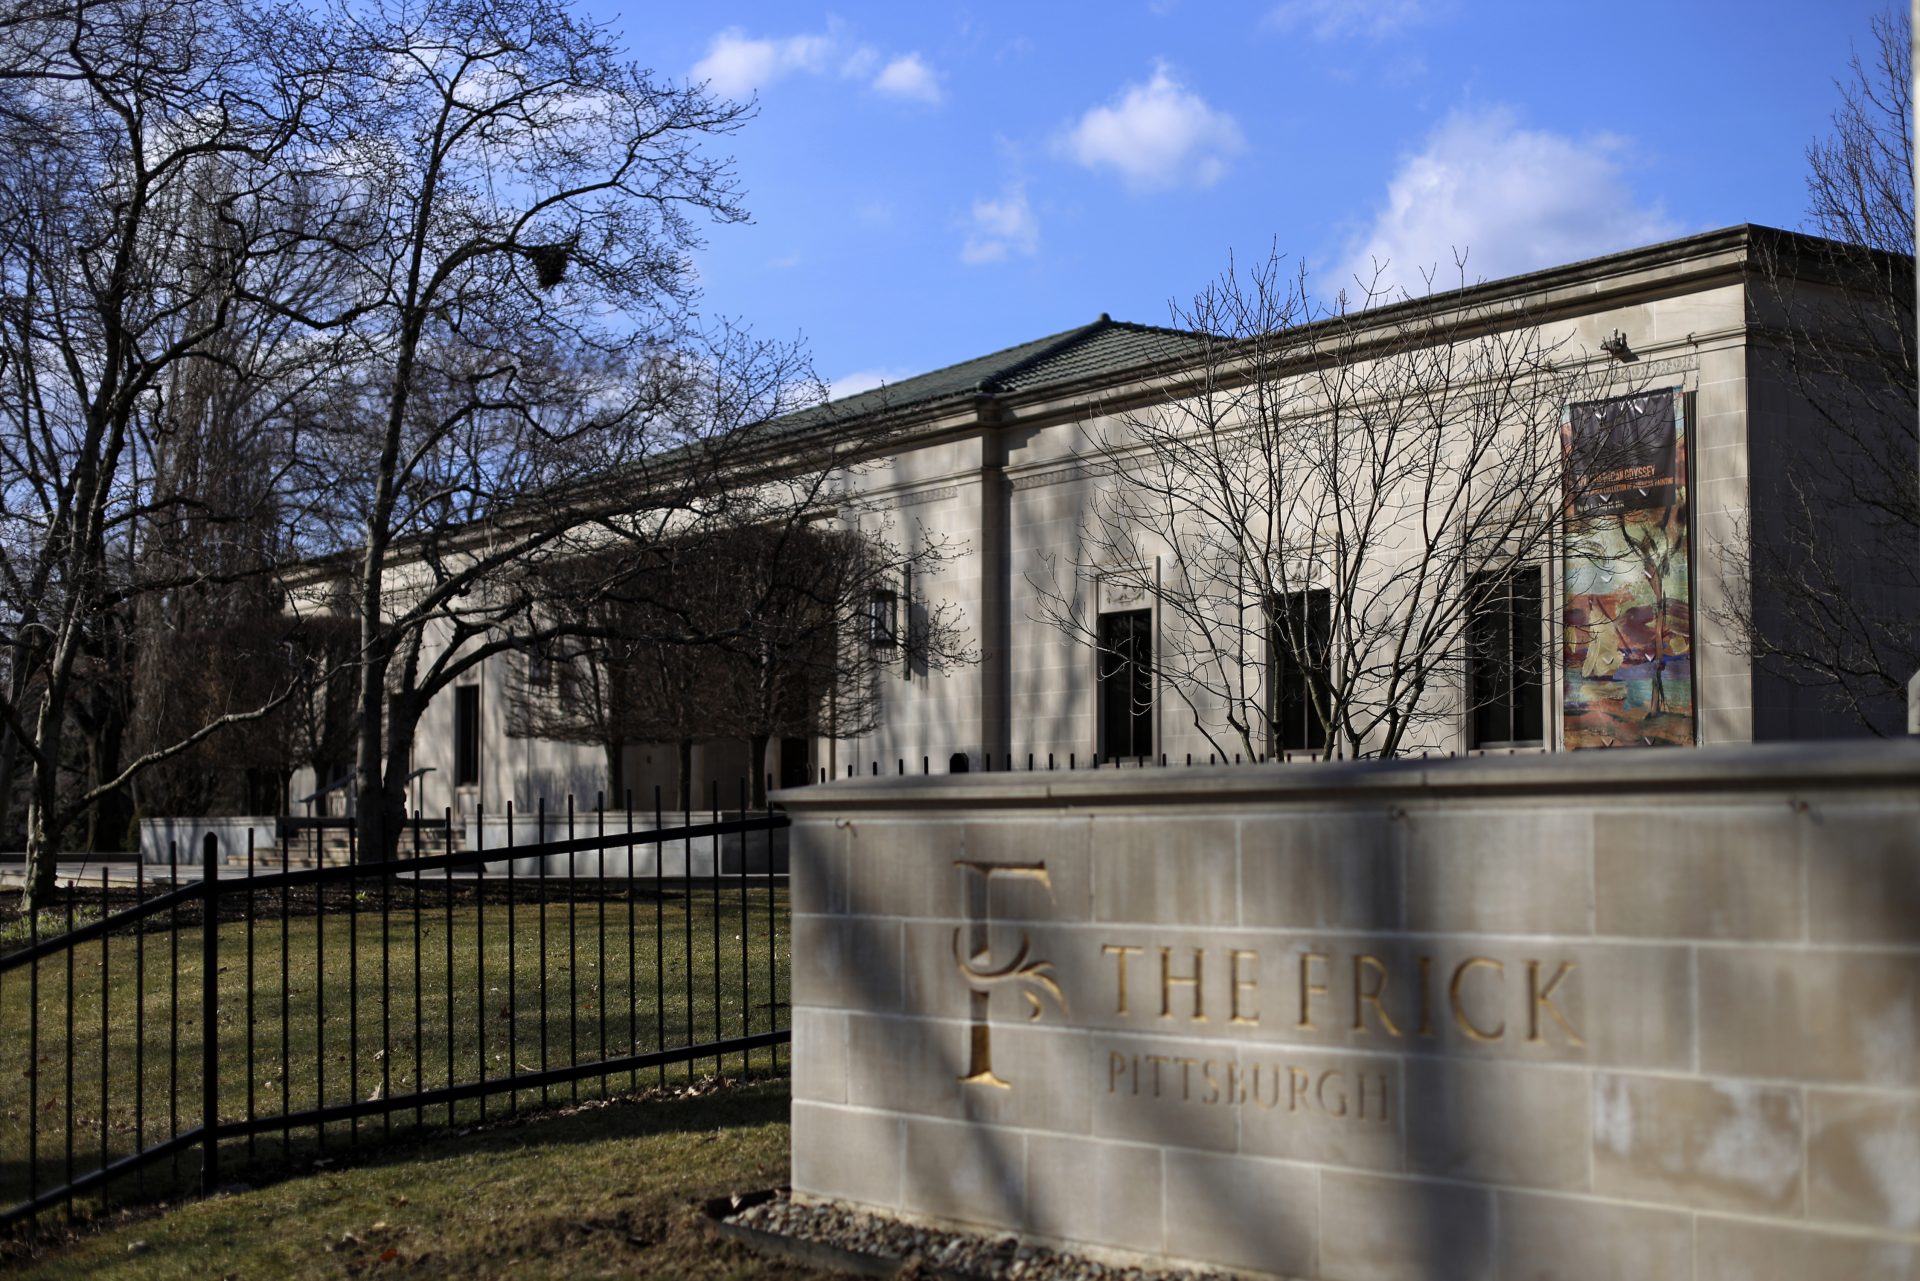 This is Frick Art Museum on the grounds of the former home of 19th century steel titan Henry Clay Frick in Pittsburgh, March 24, 2014. Admission is free and there are rotating exhibits of art from Frick's personal collection as well as a car and carriage museum that features a 1914 Rolls Royce and a 1903 electric car. The center is also on the edge of a 644 acre public park that features trails, playgrounds and lawn bowling greens.